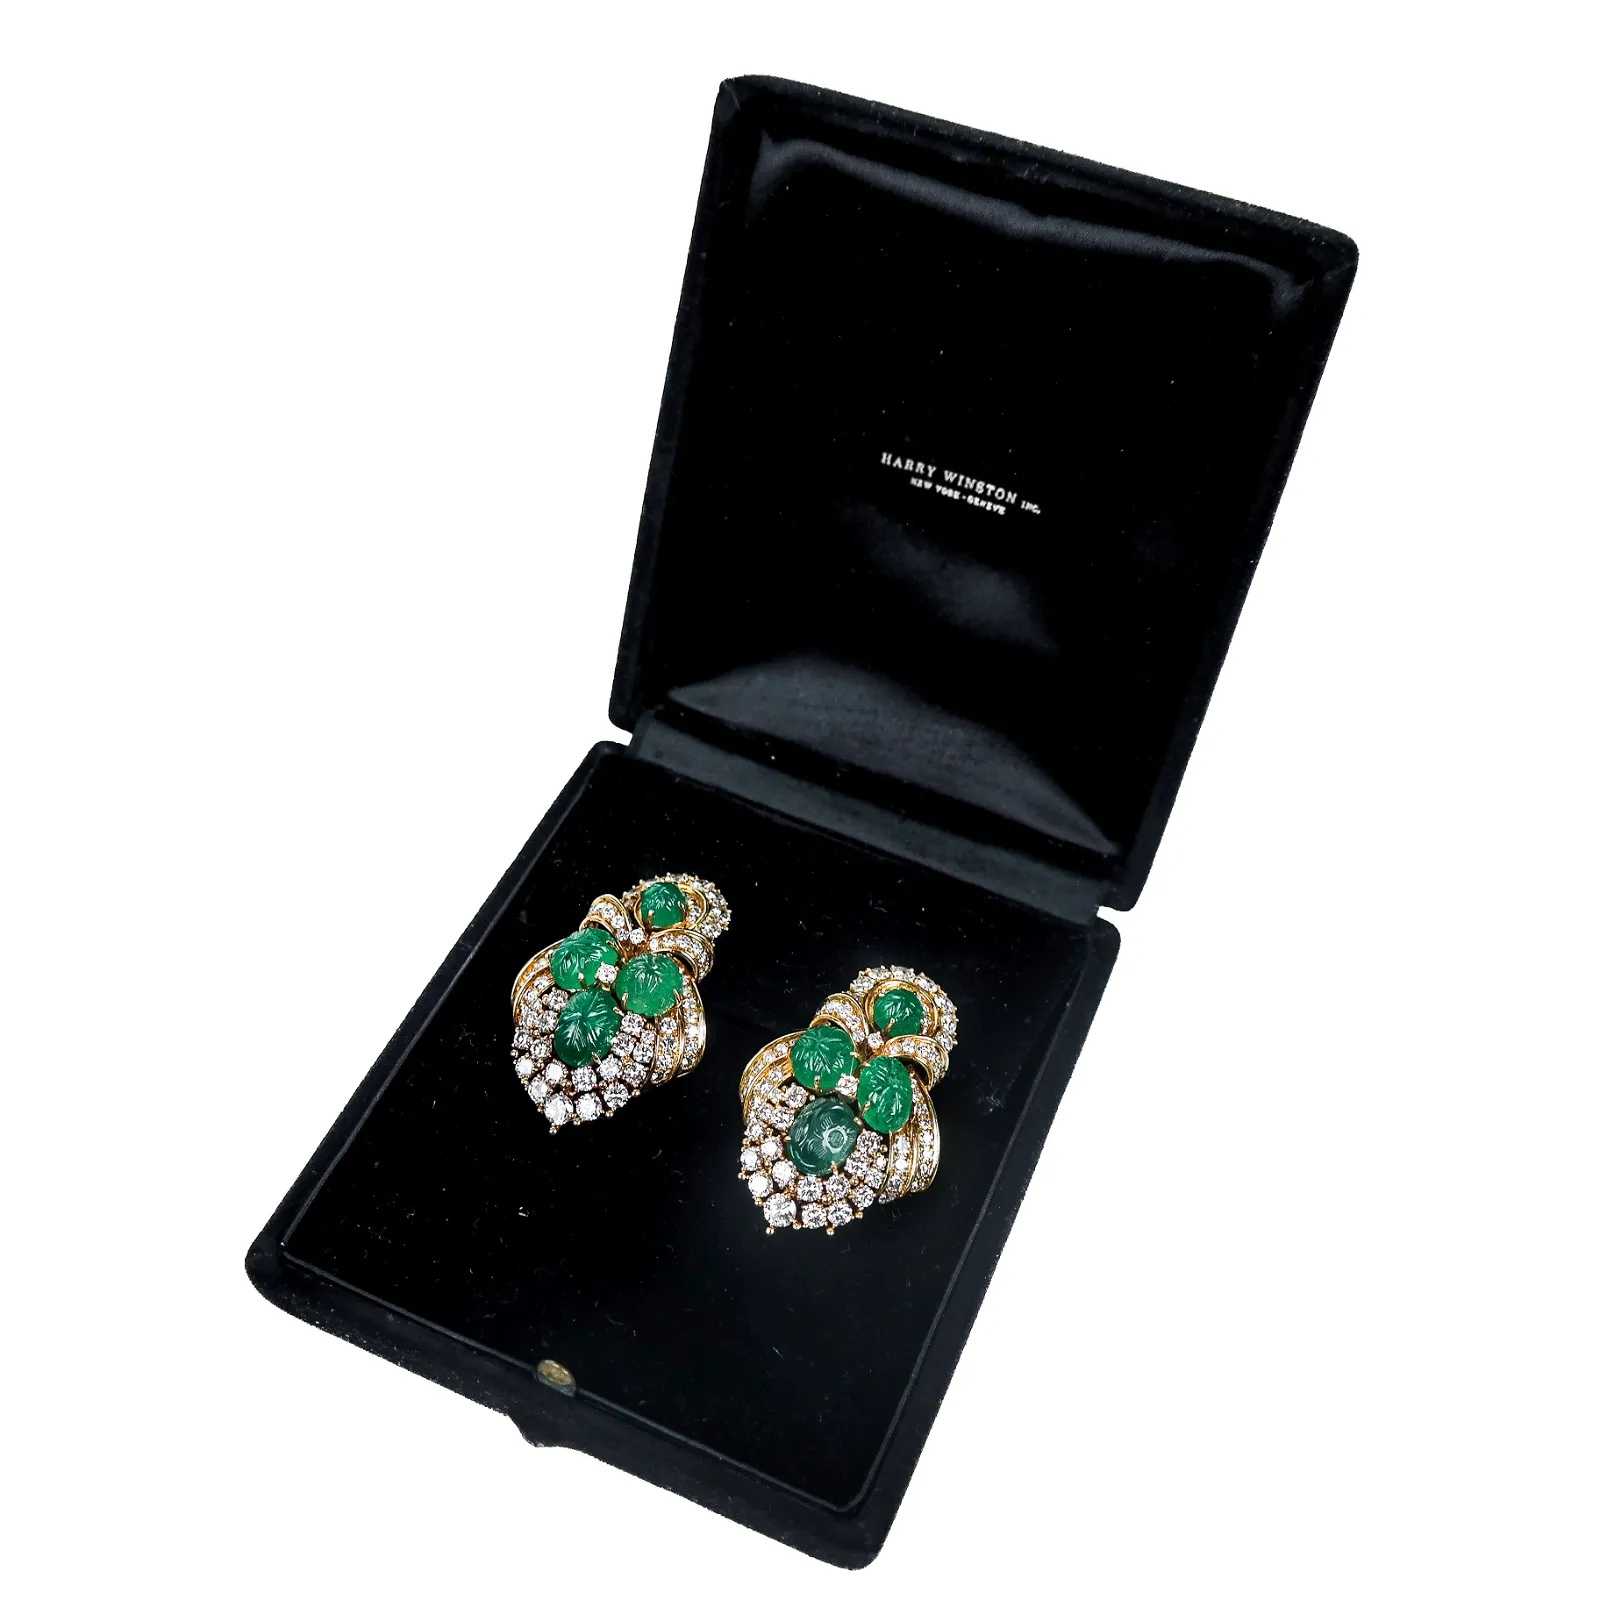 Jacques Timey for Harry Winston Diamond and Emerald Earrings, estimated at $15,000-$20,000 at Roland NY.